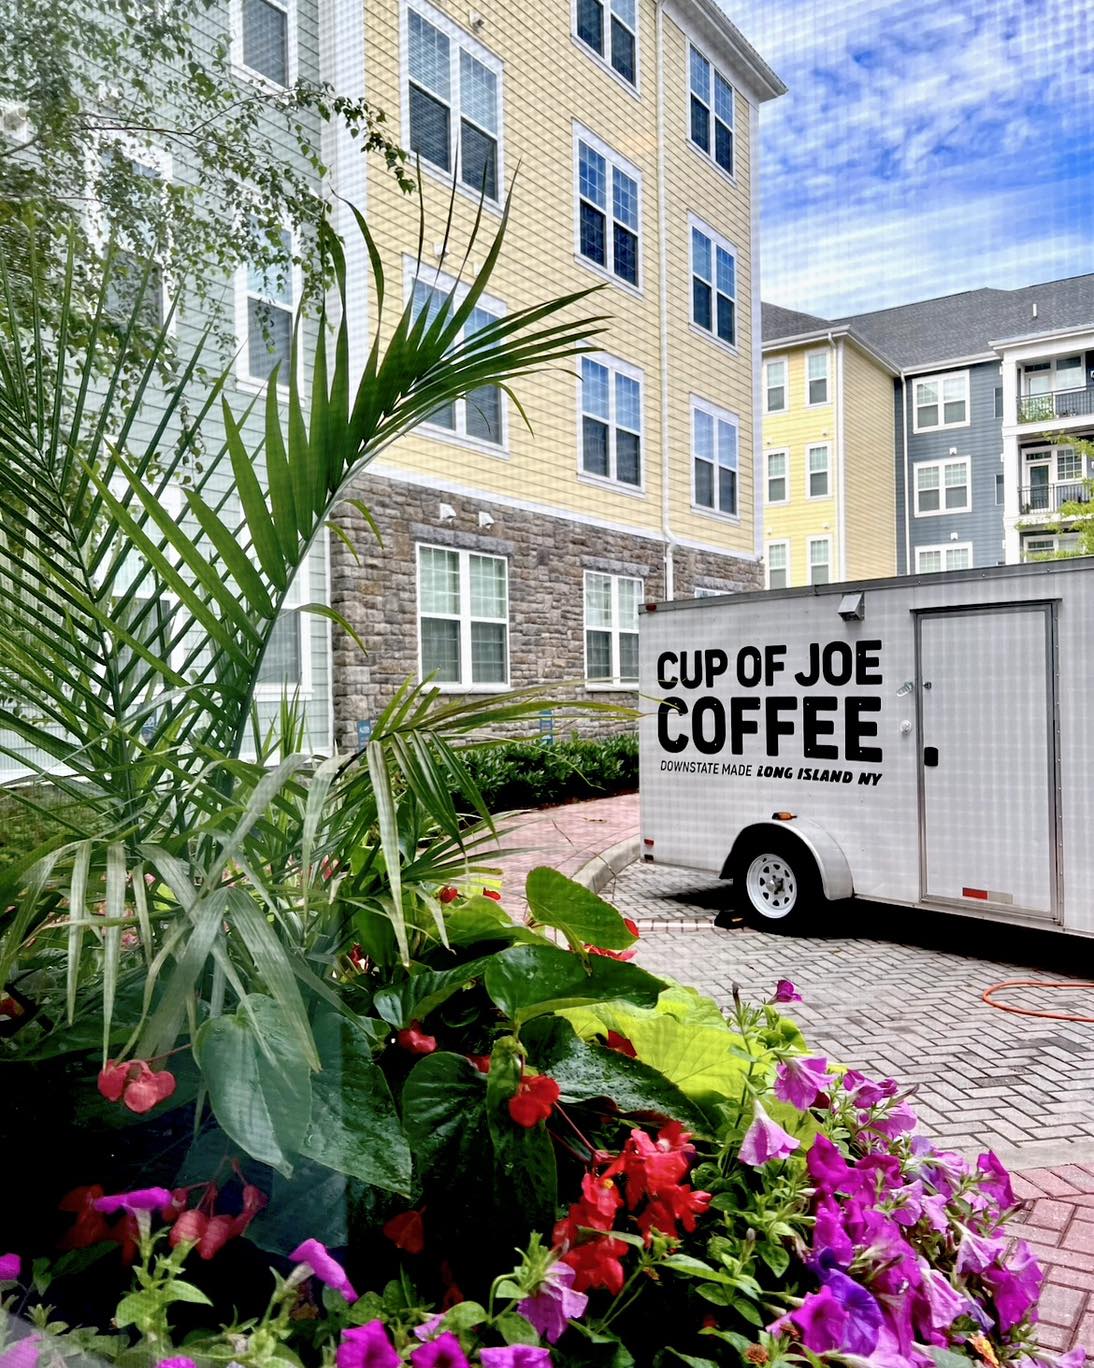 A picture of the Cup of Joe Coffee food truck taken from behind a glass and floral garden.